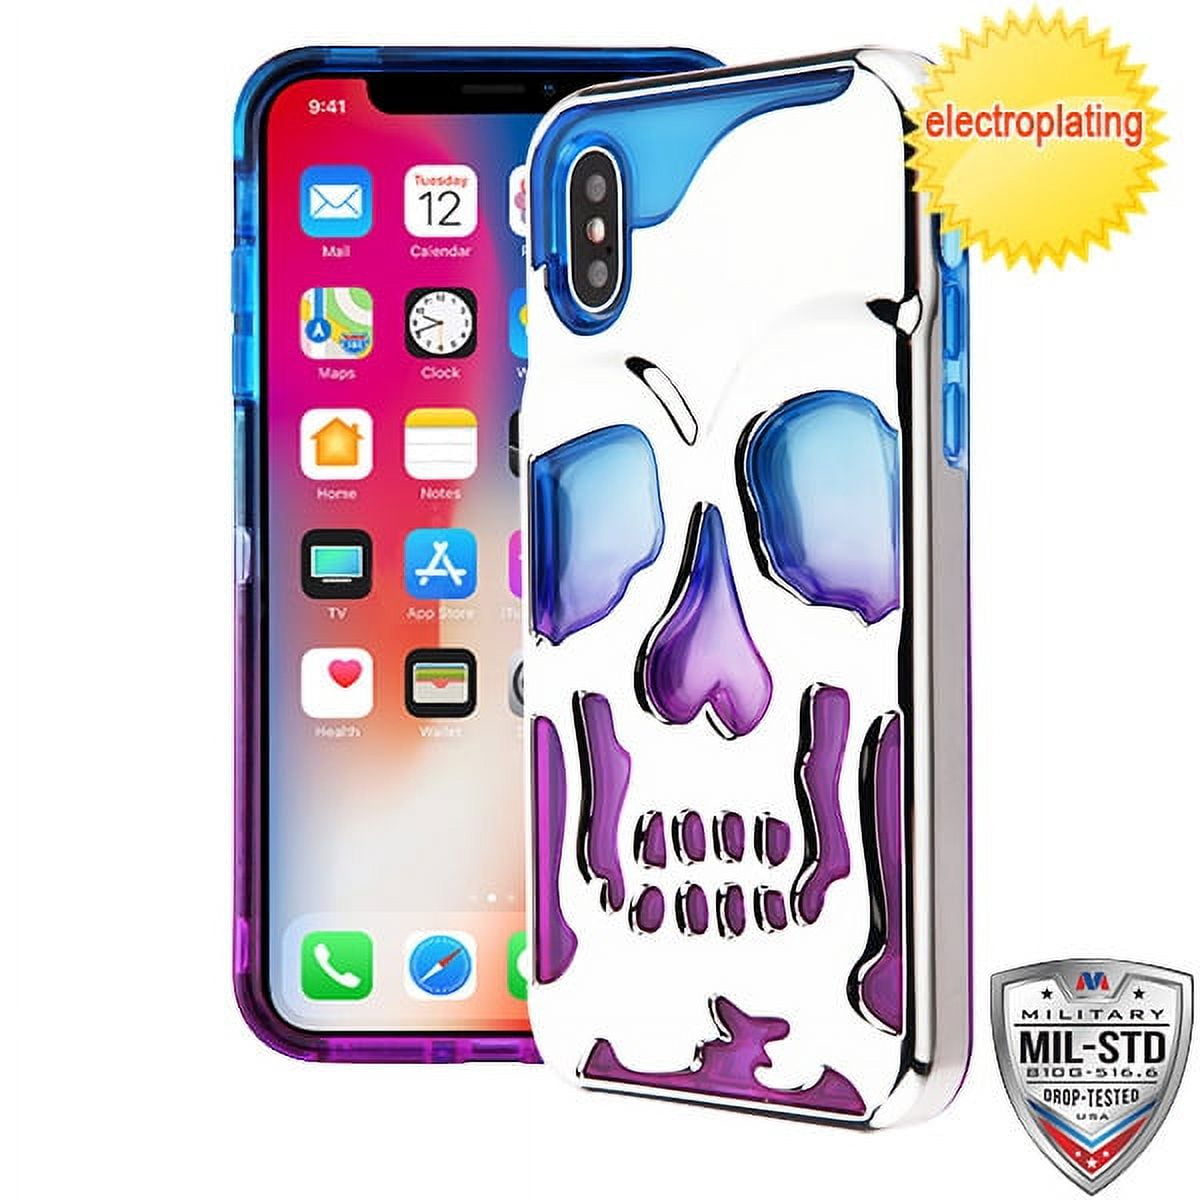 Tuff Hybrid Phone Protector Case, iphone XR, iphone 9, free screen protector